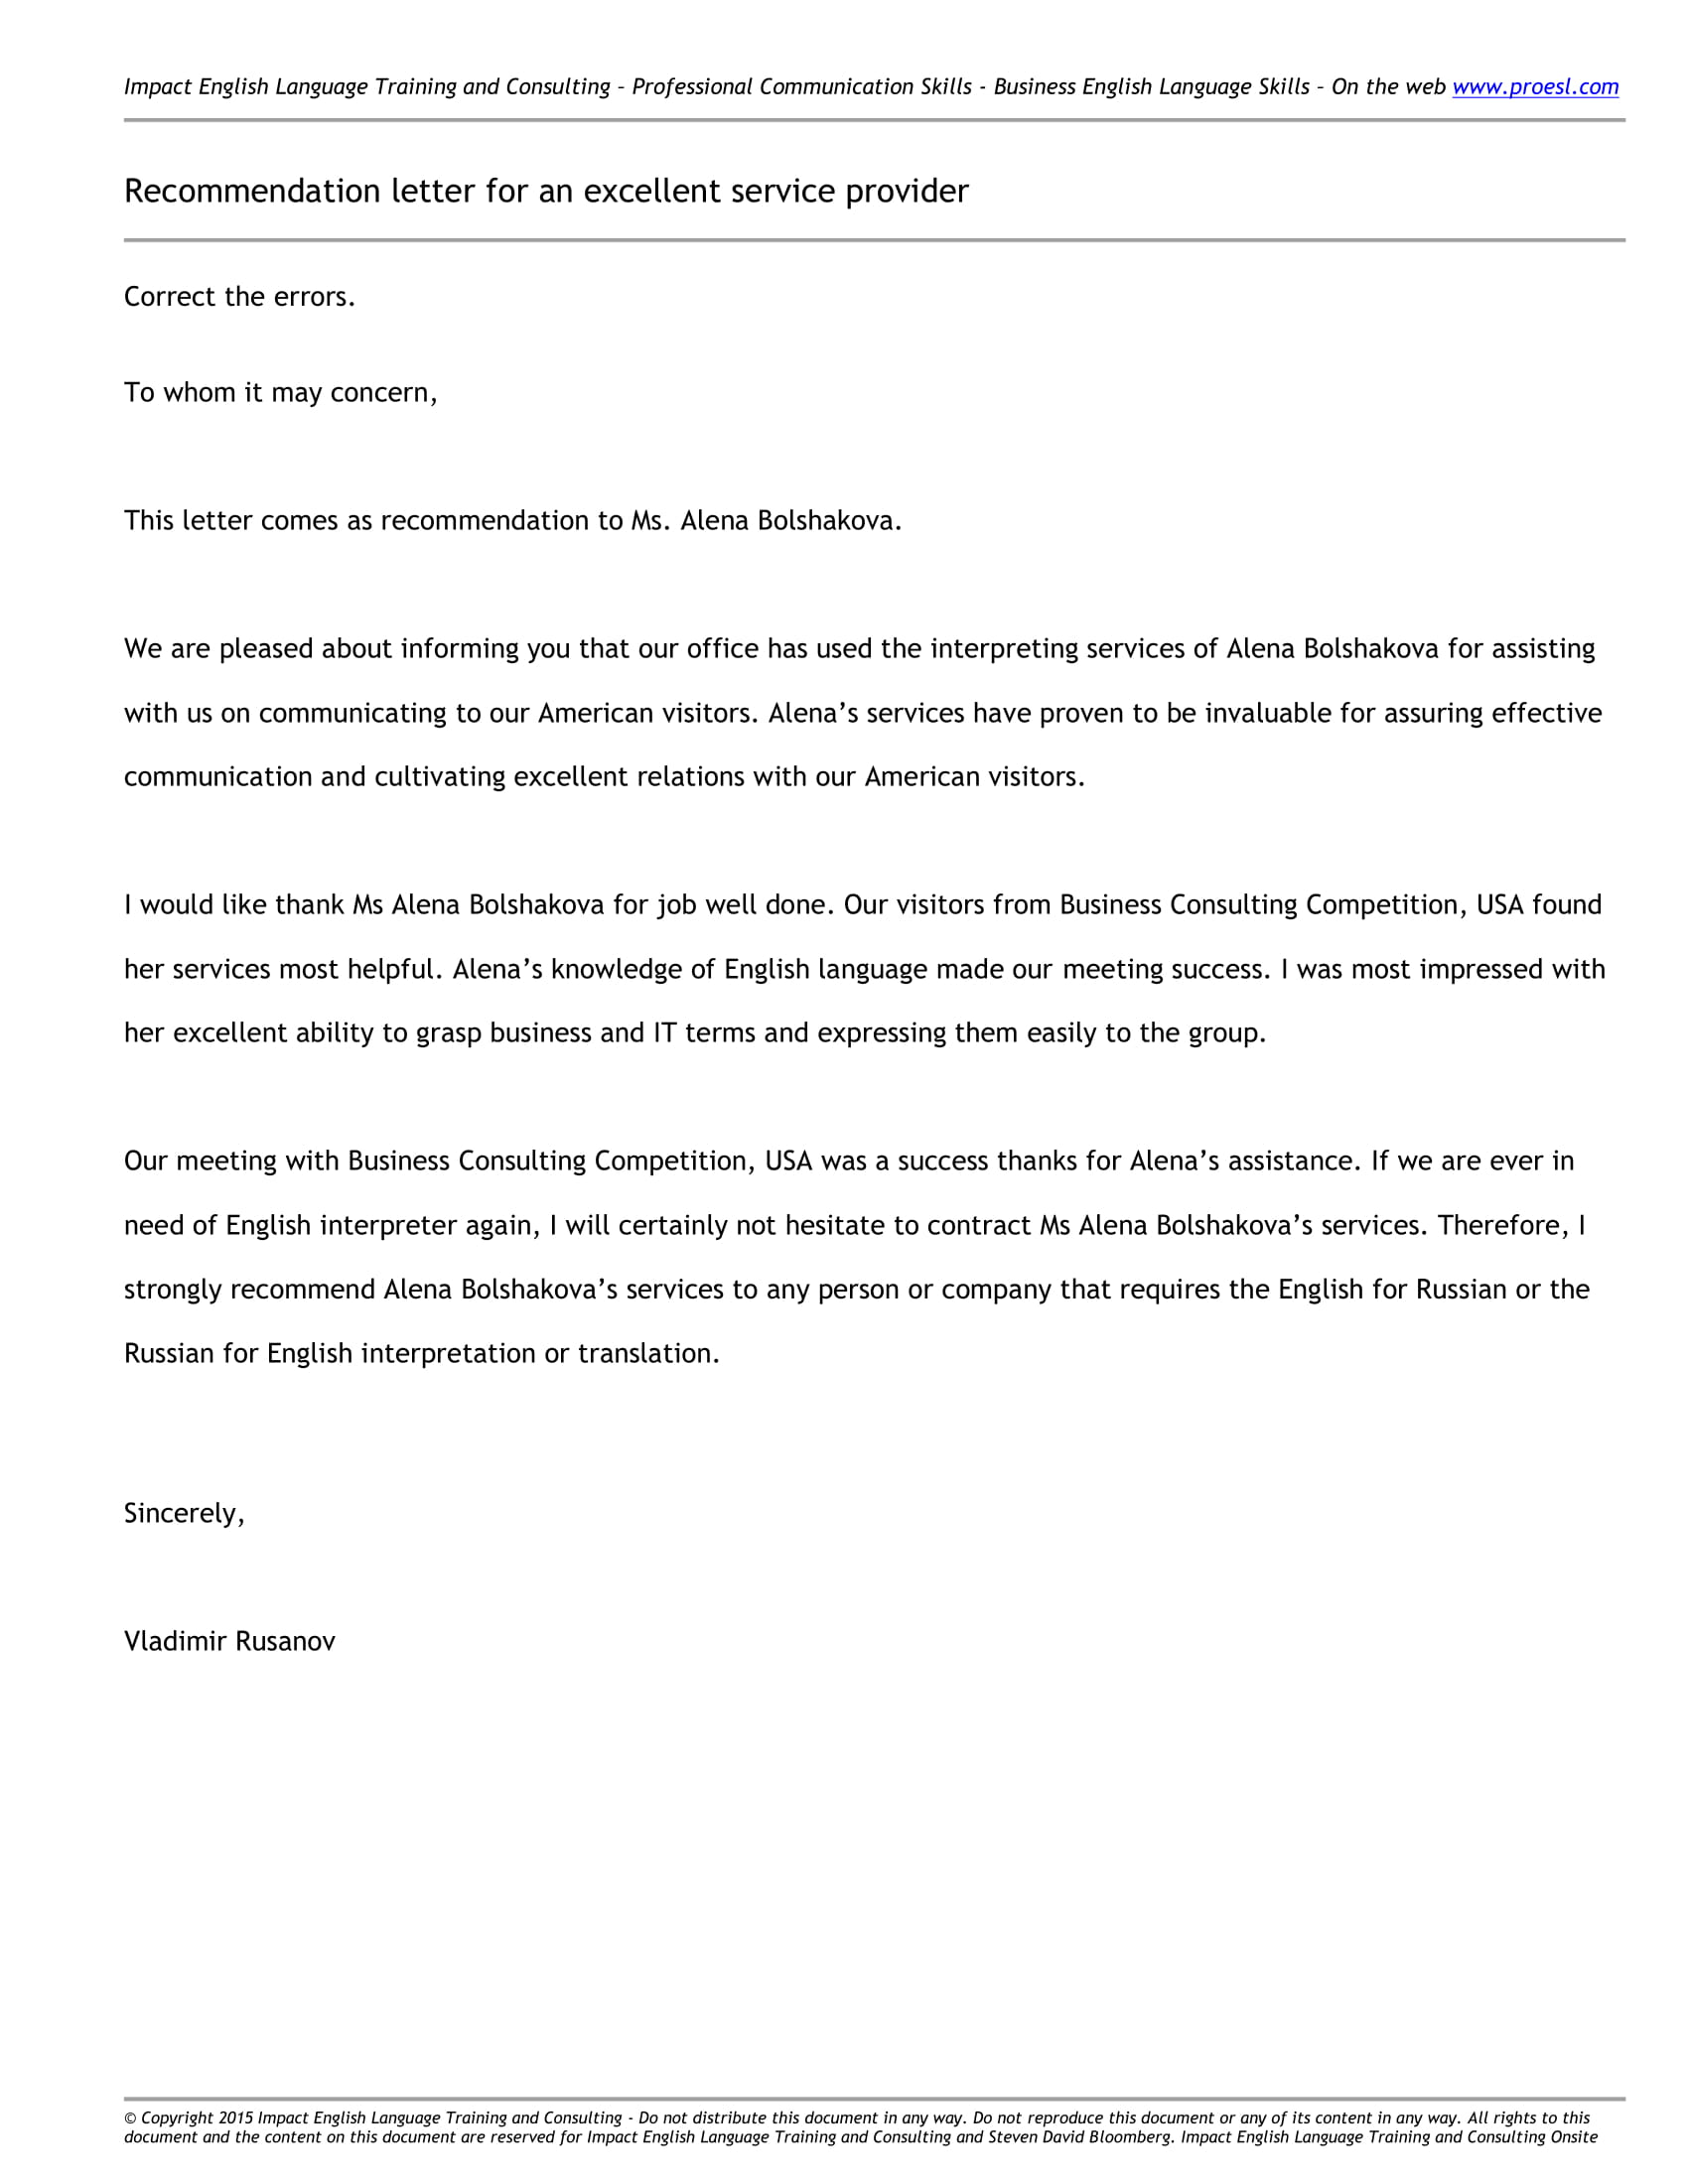 21+ Business Reference Letter Examples - PDF  Examples In Business Reference Template Word